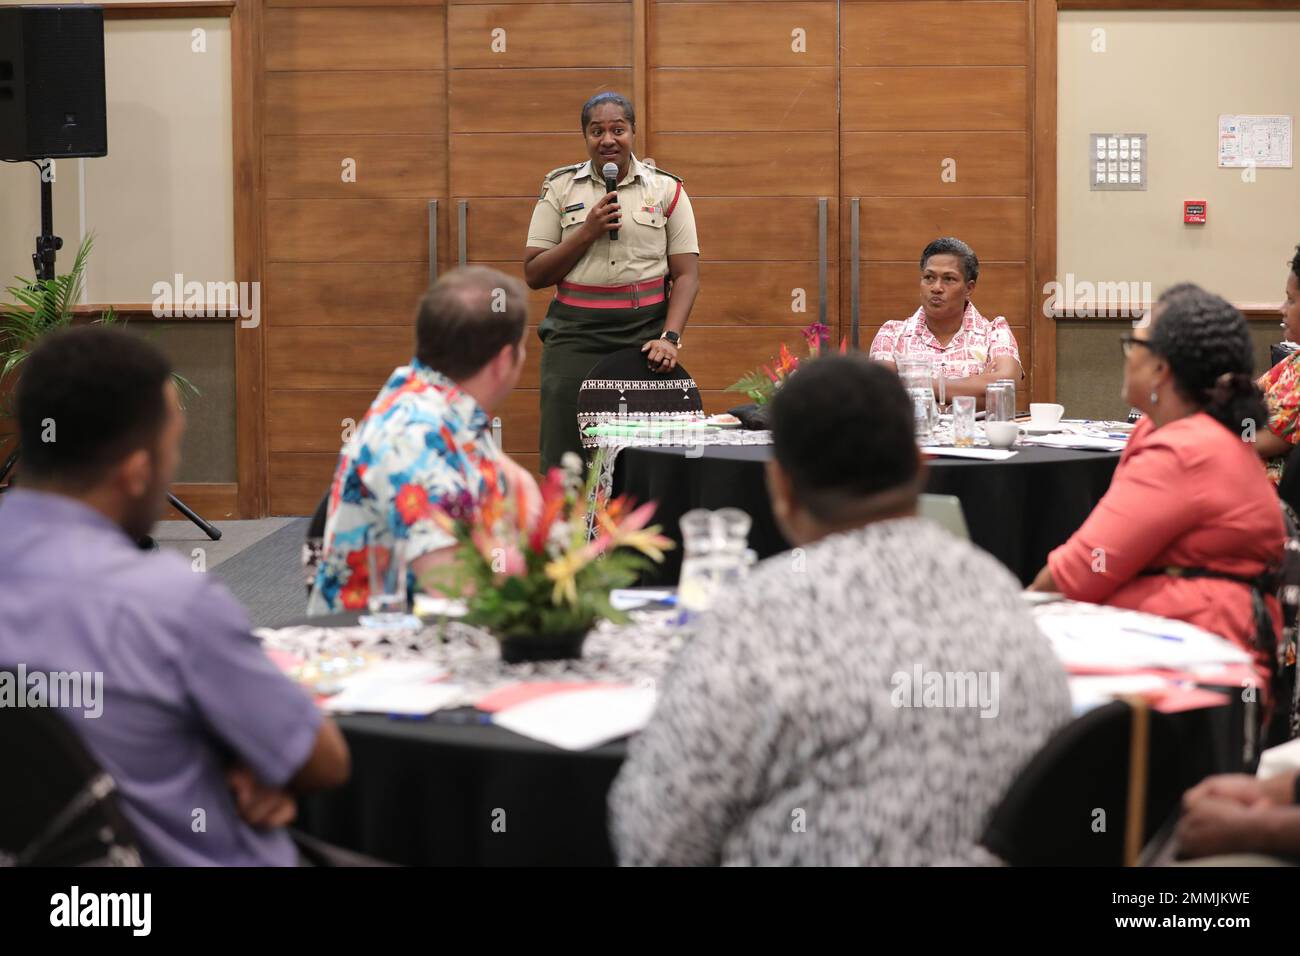 Republic of Fiji Military Forces Cpt. Ana Vuniwaqa addresses Fijian government and civil society organization stakeholders at the Fiji Women, Peace and Security National Action Plan Orientation Workshop in Suva, Fiji, Sept. 20, 2022. Facilitated by U.S. Indo-Pacific Command, the workshop consisted of Fijian government and civil society organization representatives who lead the development of a Fiji WPS National Action Plan guided by UN Security Council Resolution (UNSCR) 1325 principles and gender perspective. Stock Photo